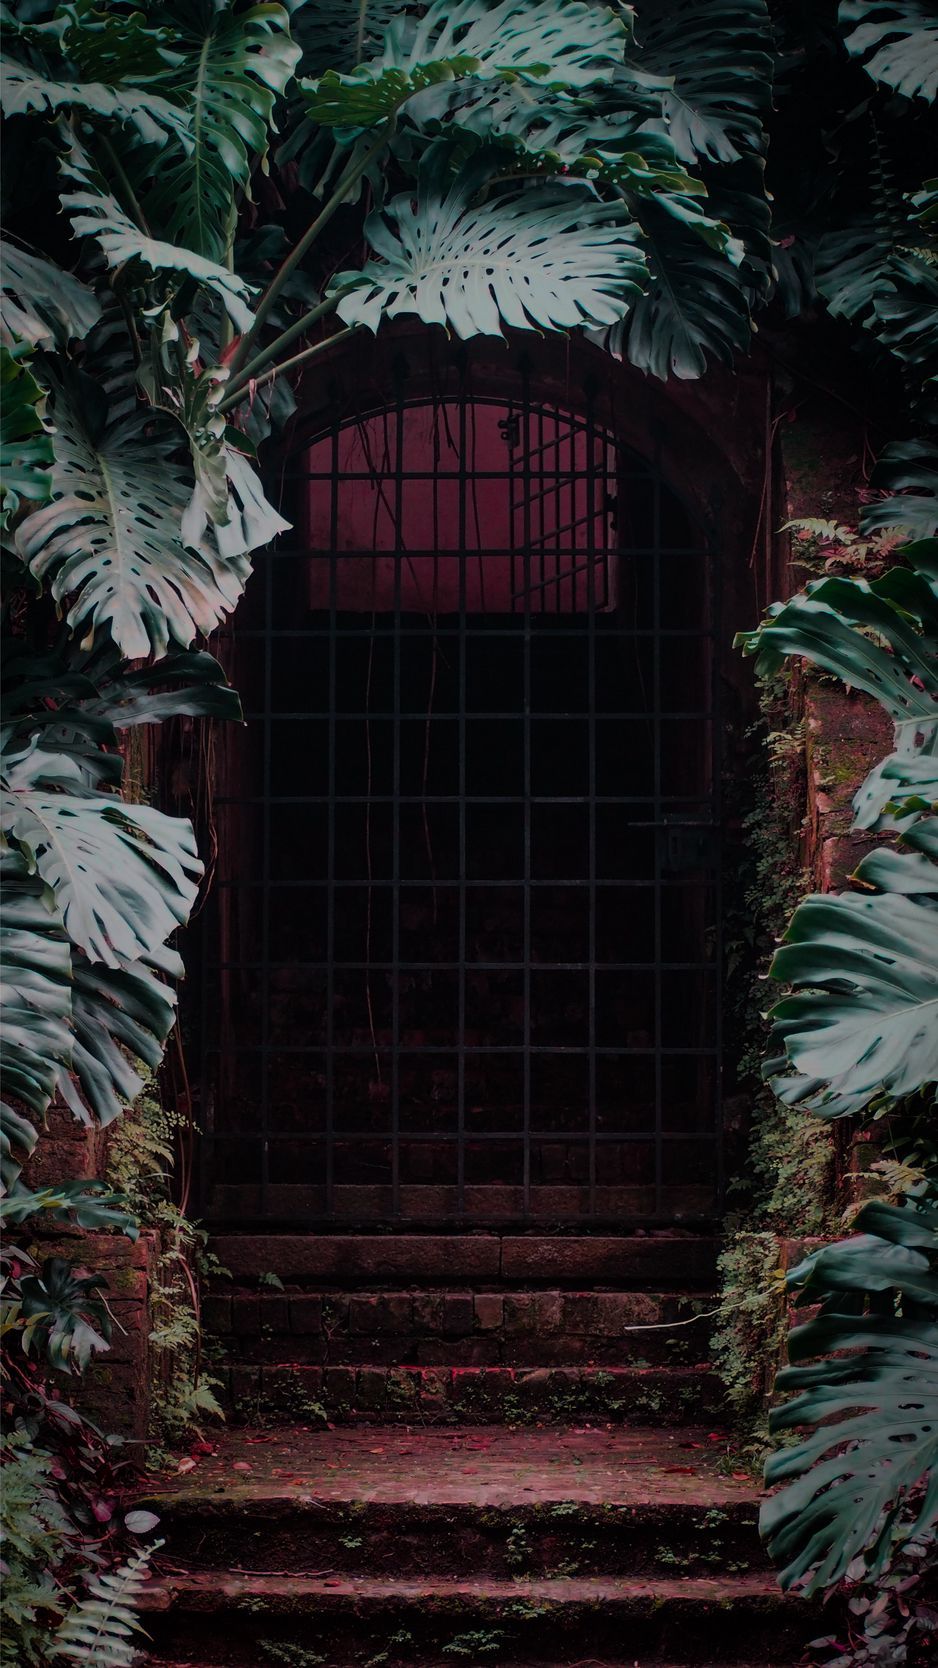 IPhone wallpaper of a doorway surrounded by greenery - Monstera